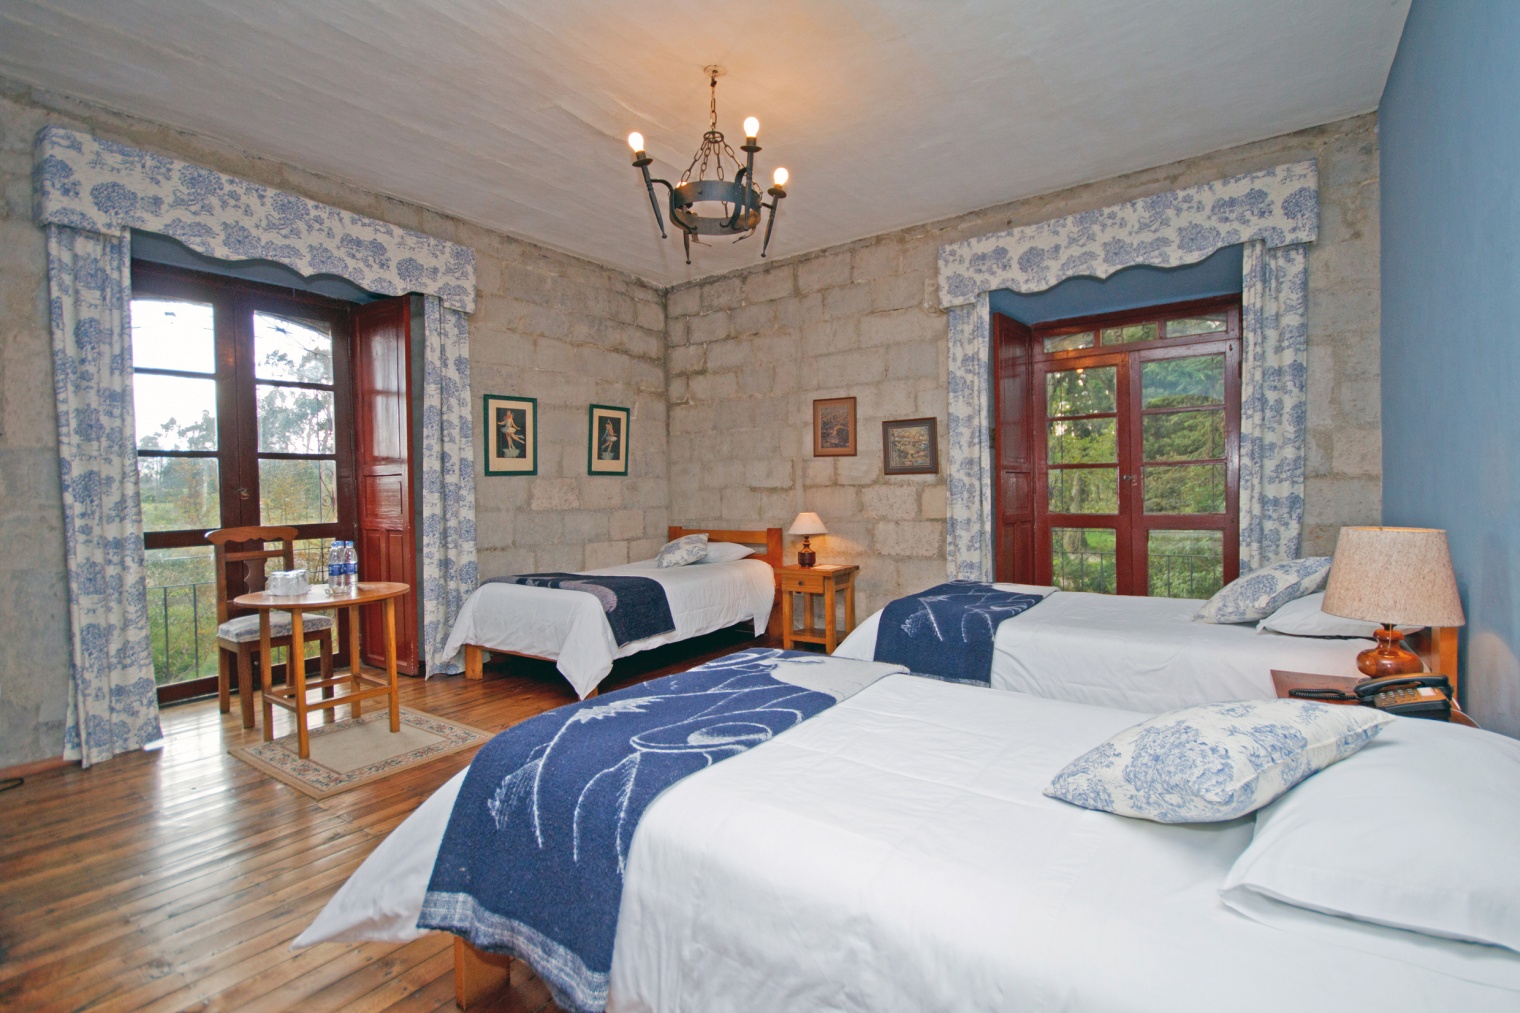 Sleep in traditional haciendas during your Tren Crucero experience | Travel Nation